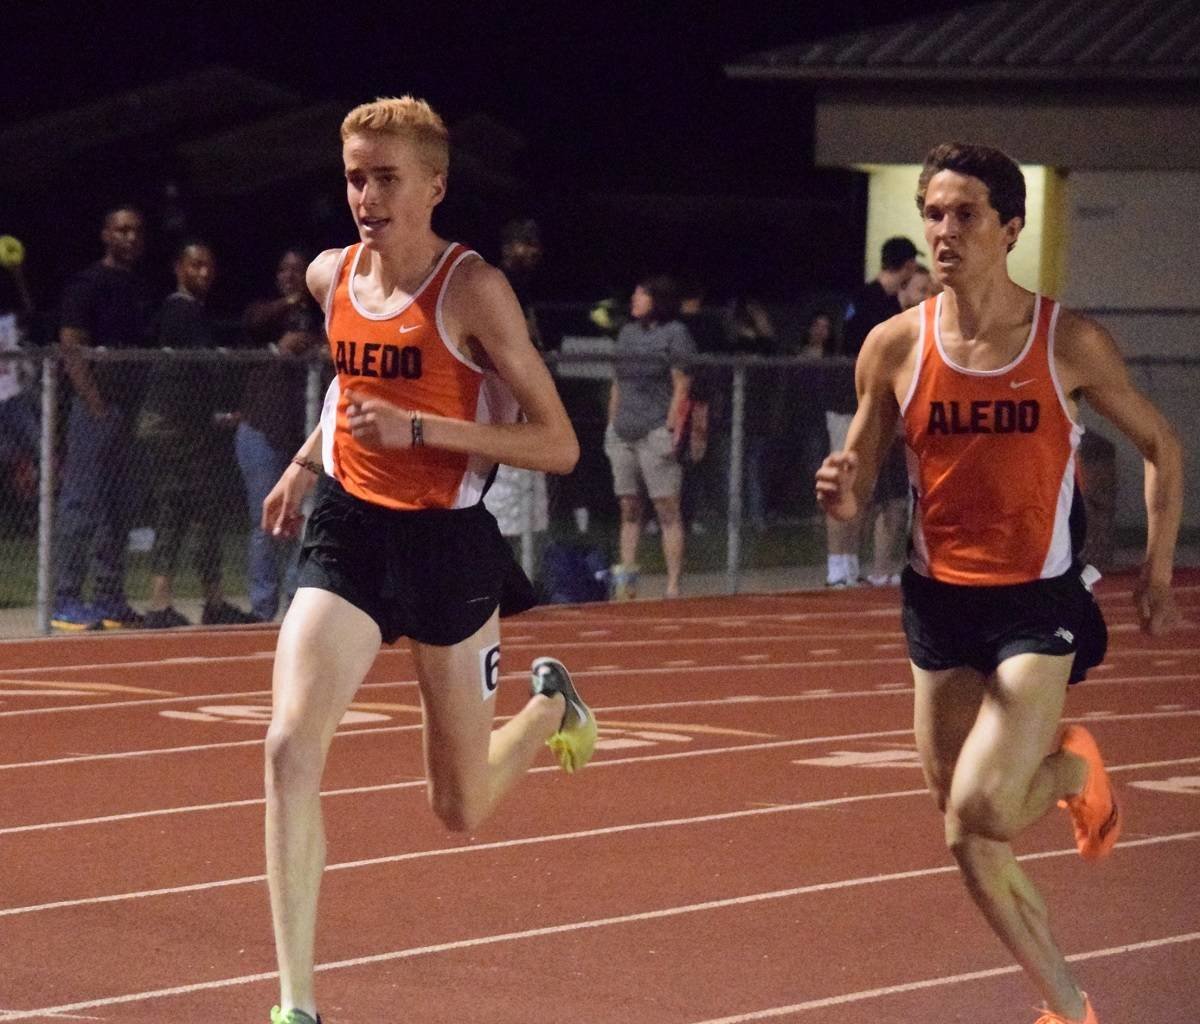 Aledo freshman Graydon Morris (left) and Harrison Tillman, shown in the 1,600-meter run at the area track meet, each qualified for the regional meet in the 3,200- and 1,600-meter runs. Morris won both races, and Tillman finished second in both events. Photo by Tony Eierdam